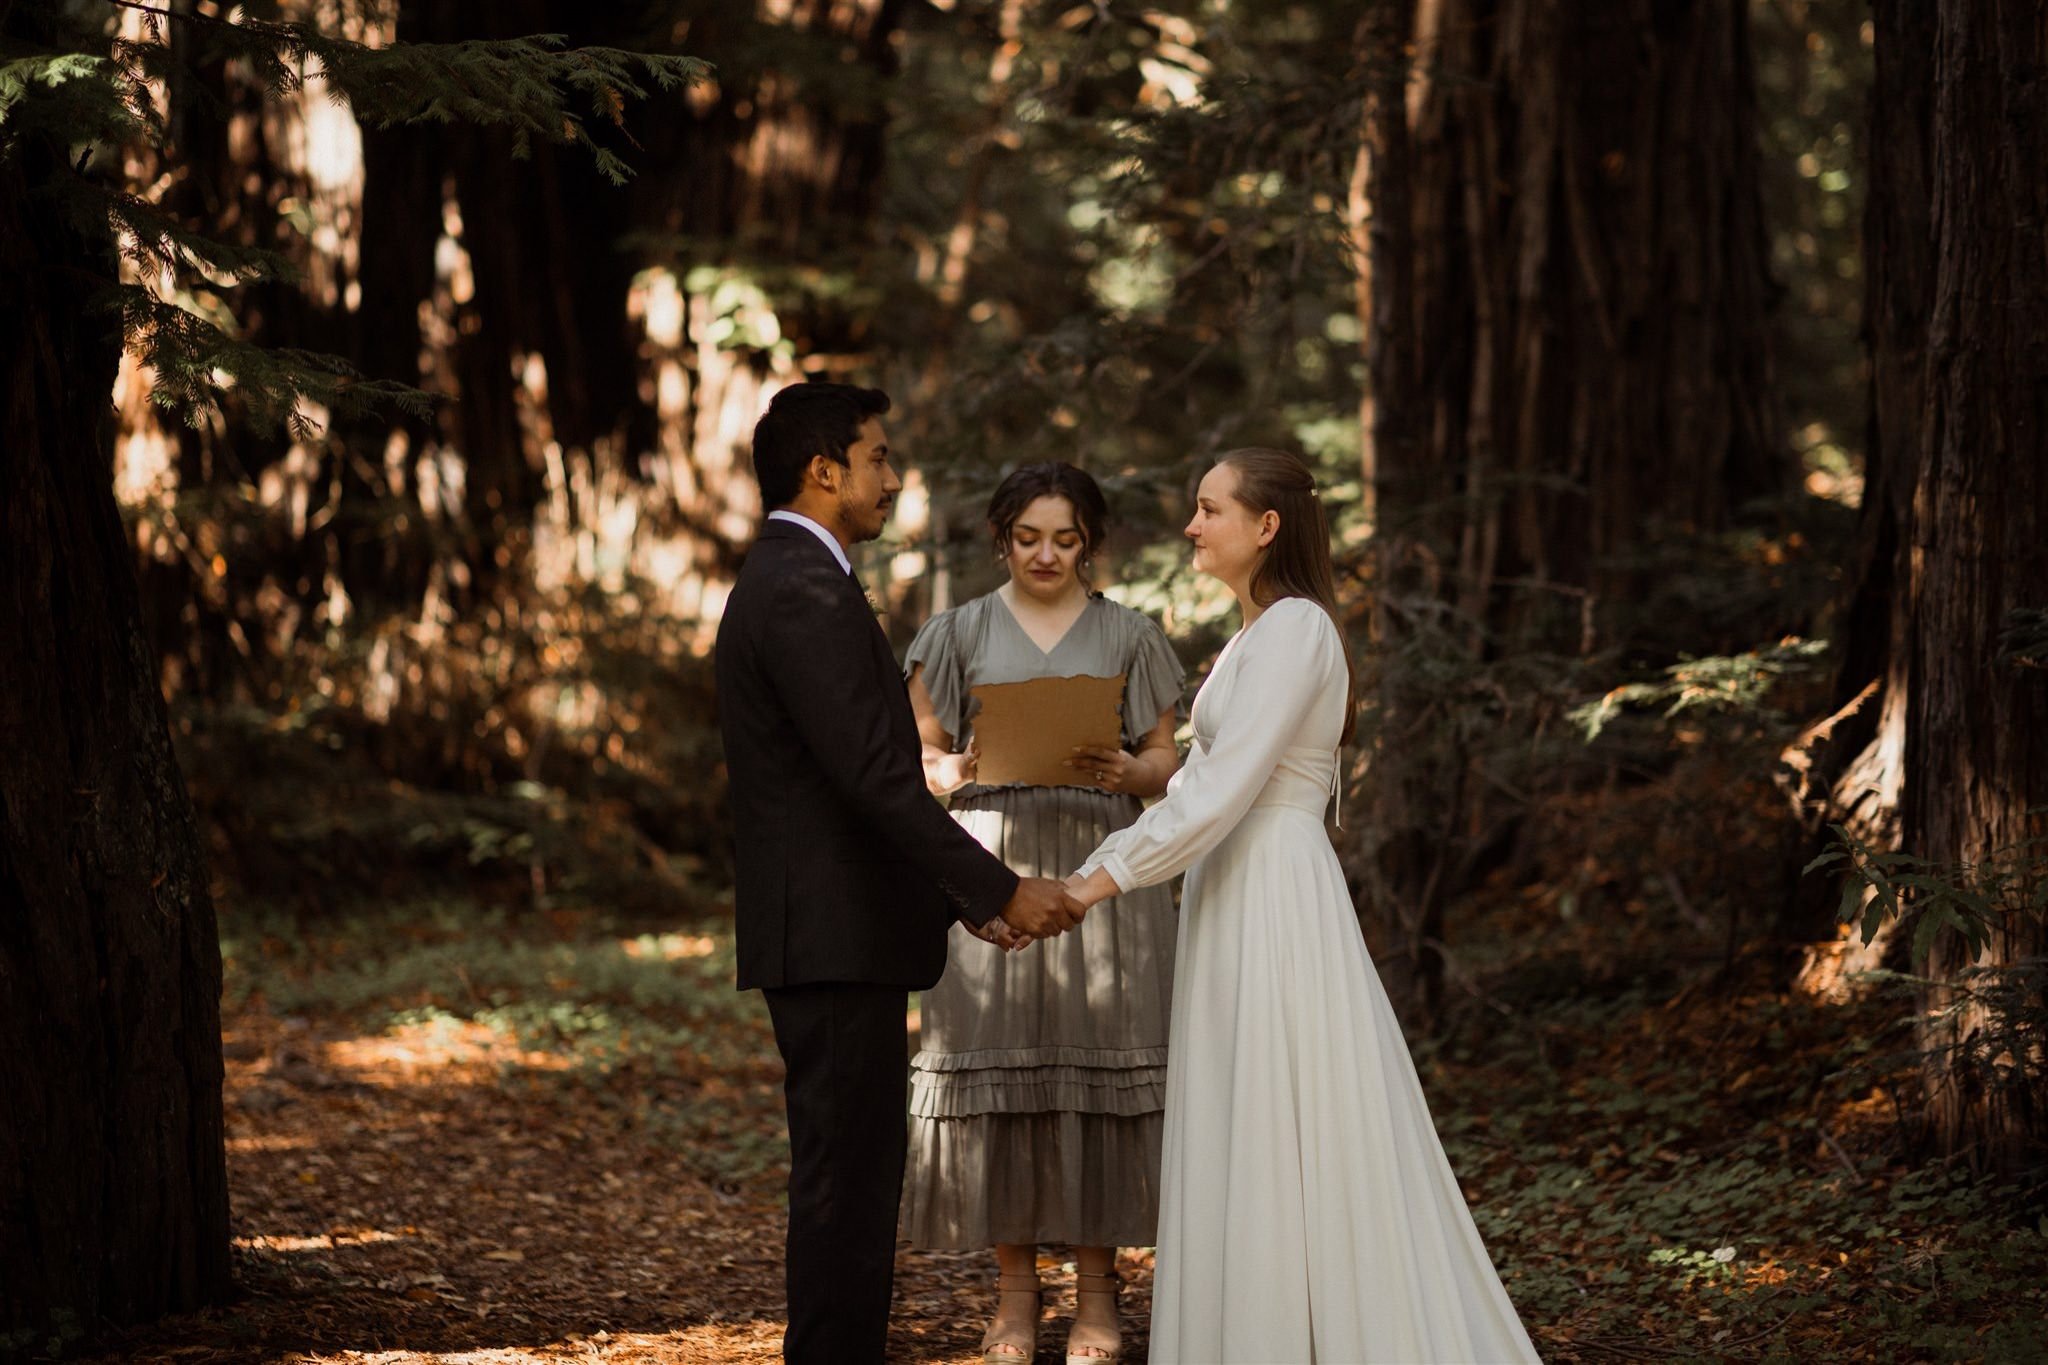 040_Two-Day Big Sur Redwoods Elopement with Family_Will Khoury Elopement Photographer.jpg